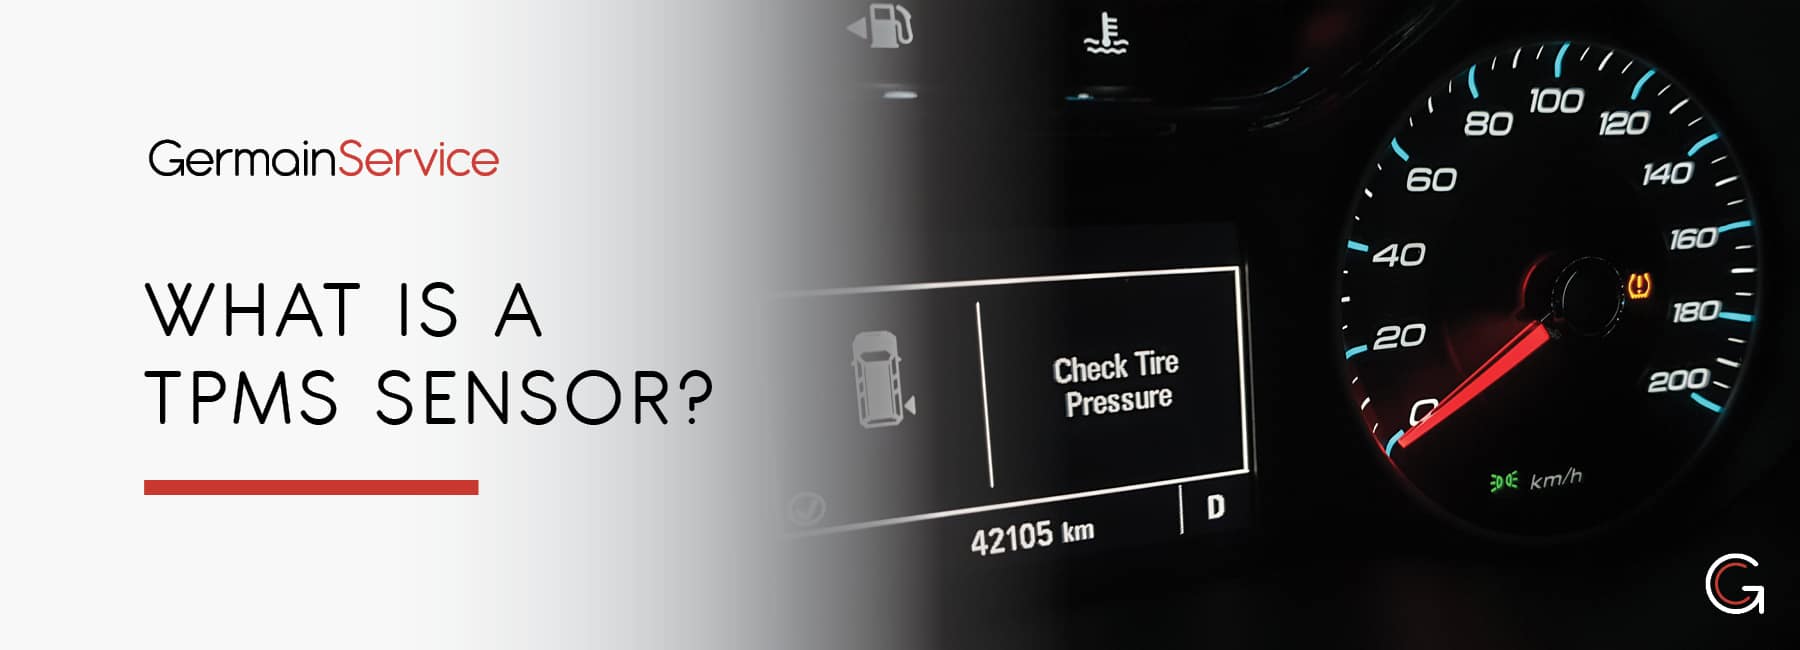 Persistent Buick Cascada Tire Pressure Warning Light: What You Should Know